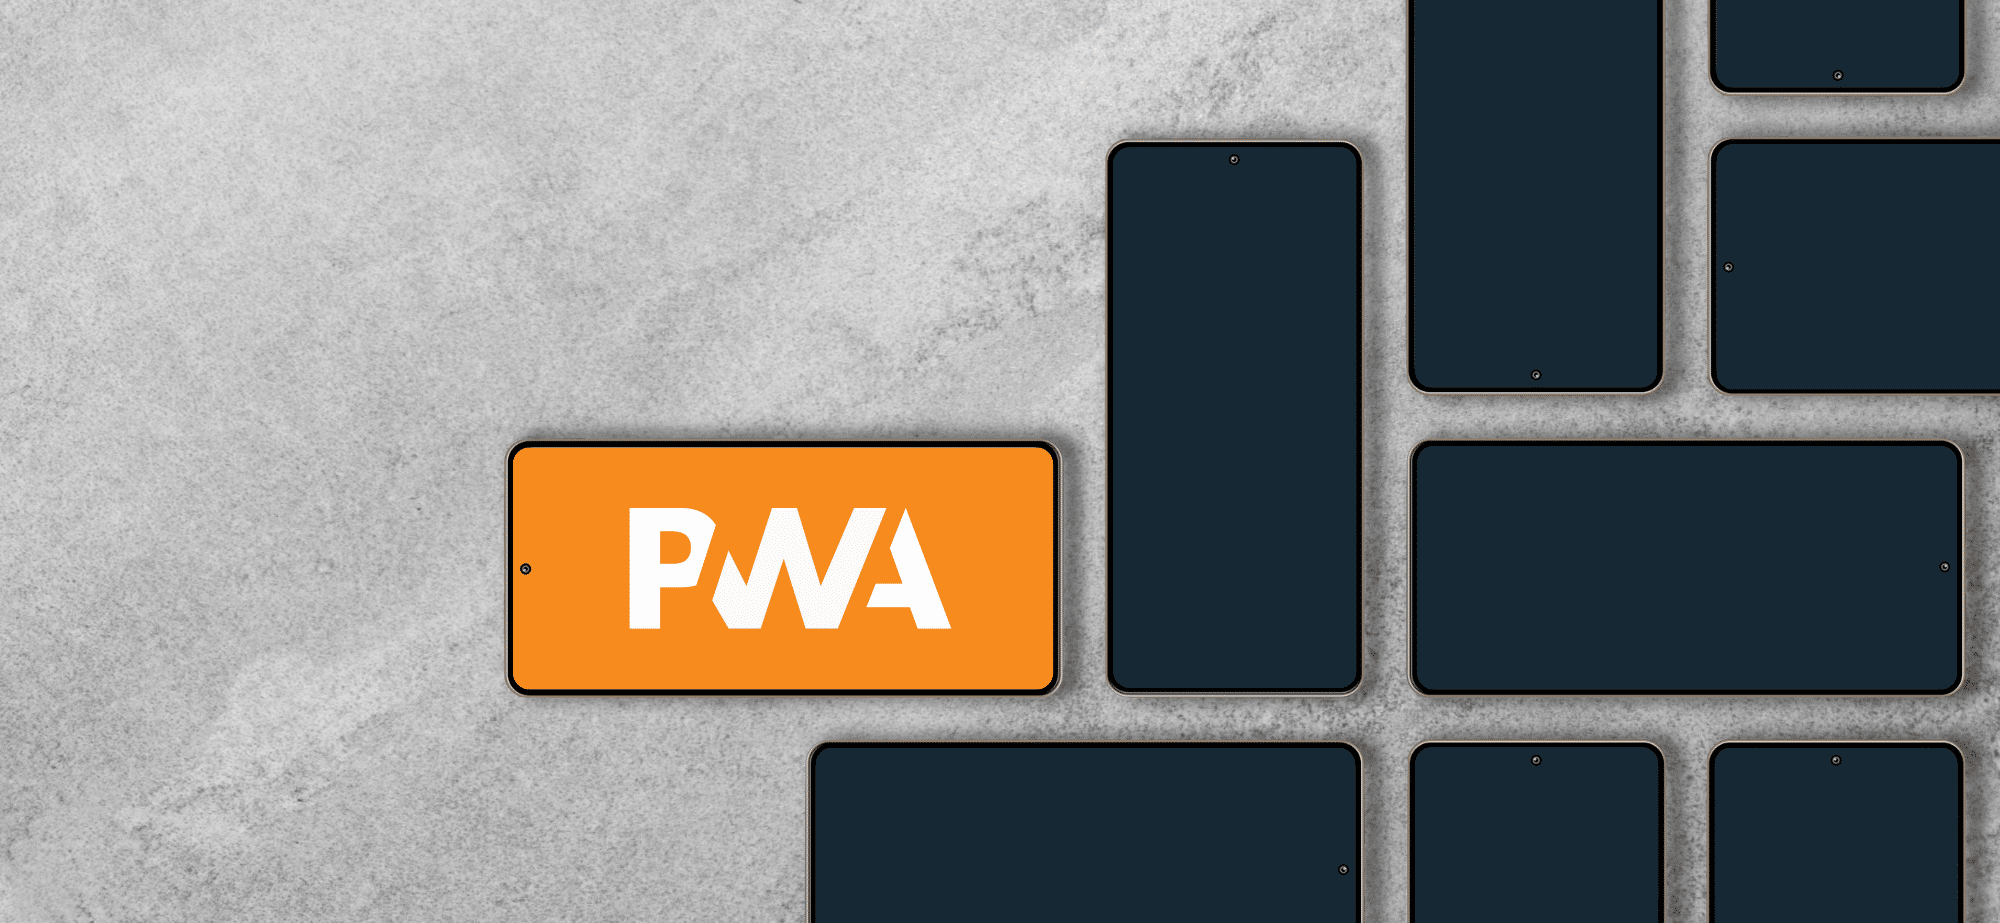 An image of phones on a grey surface with one phone displaying a white PWA logo on an orange phone screen